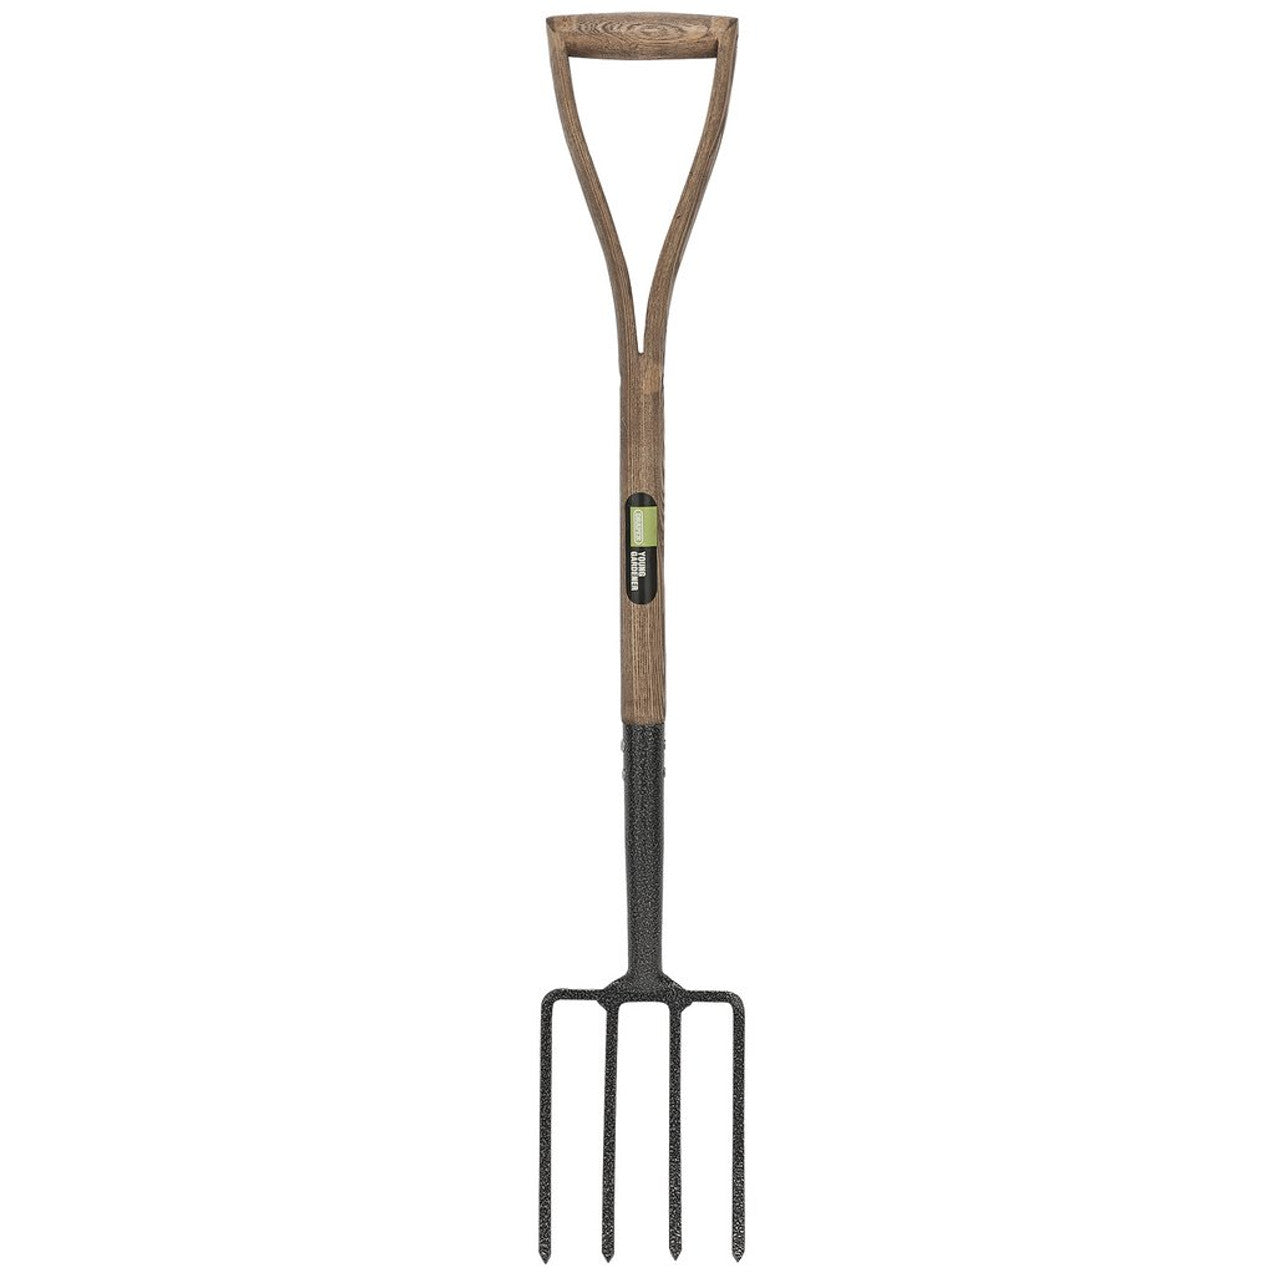 Young Gardener Digging fork with ash handle